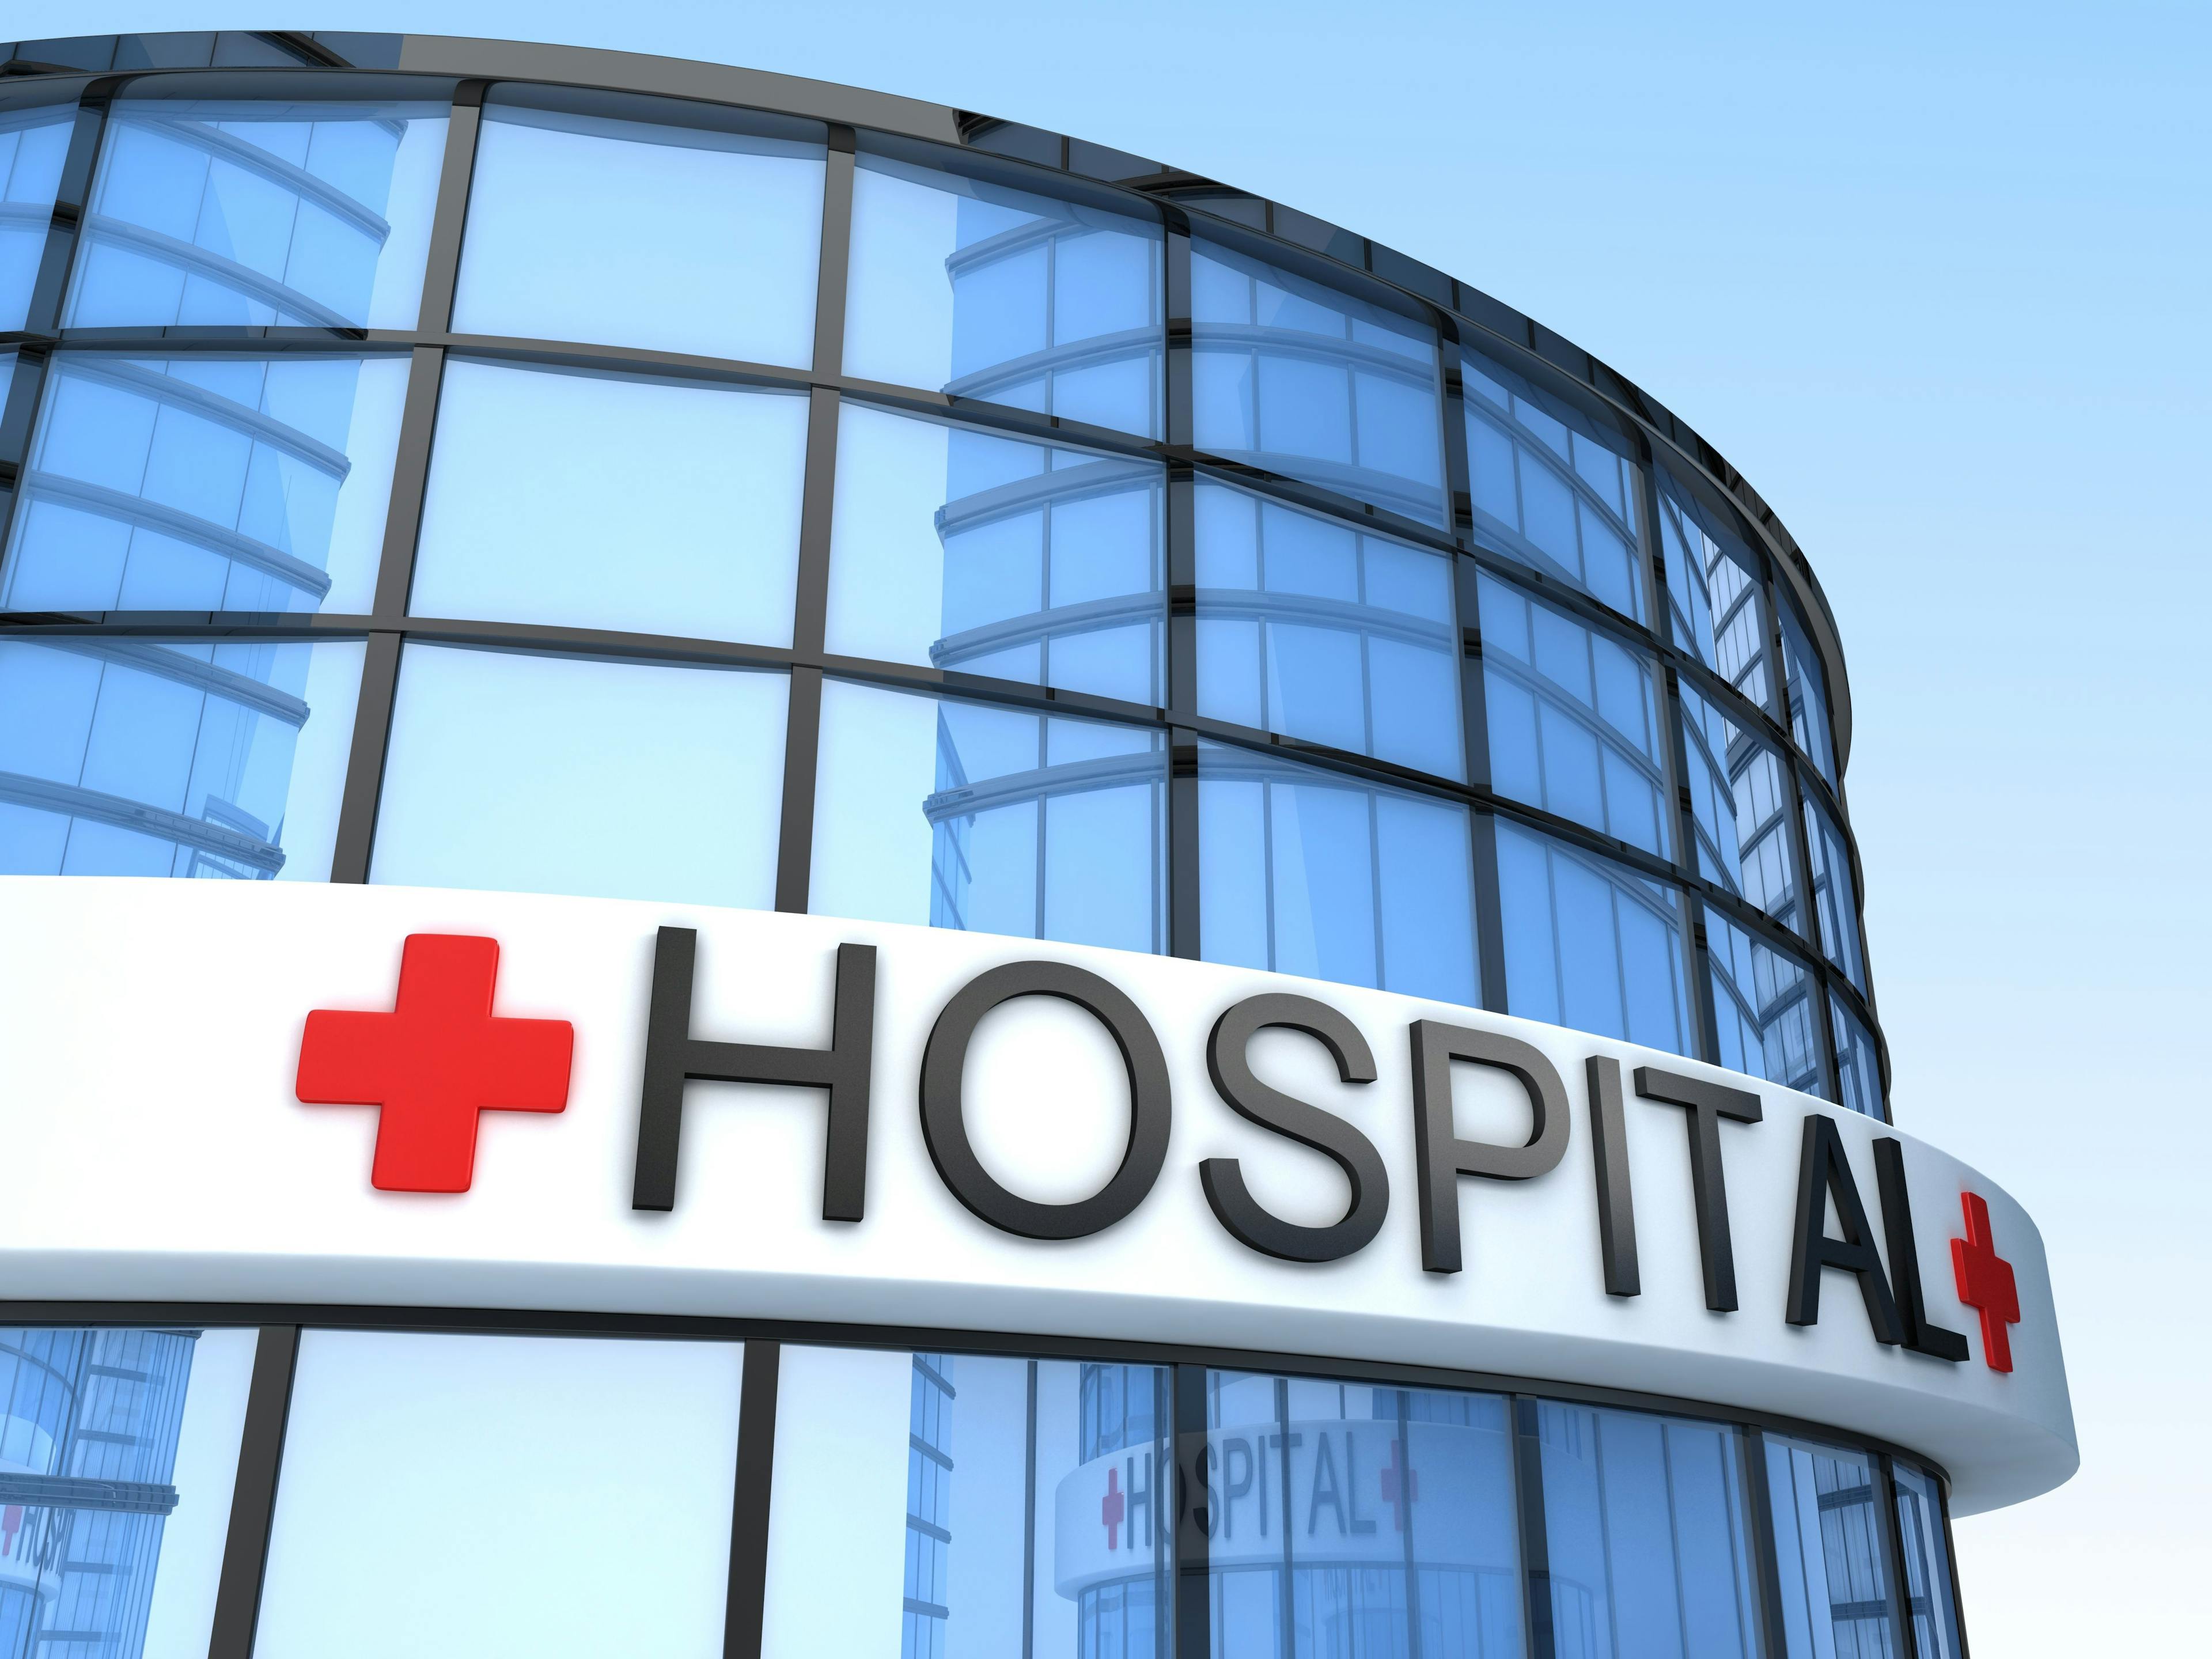 Hospitals implement retention strategies to stave off staffing shortages